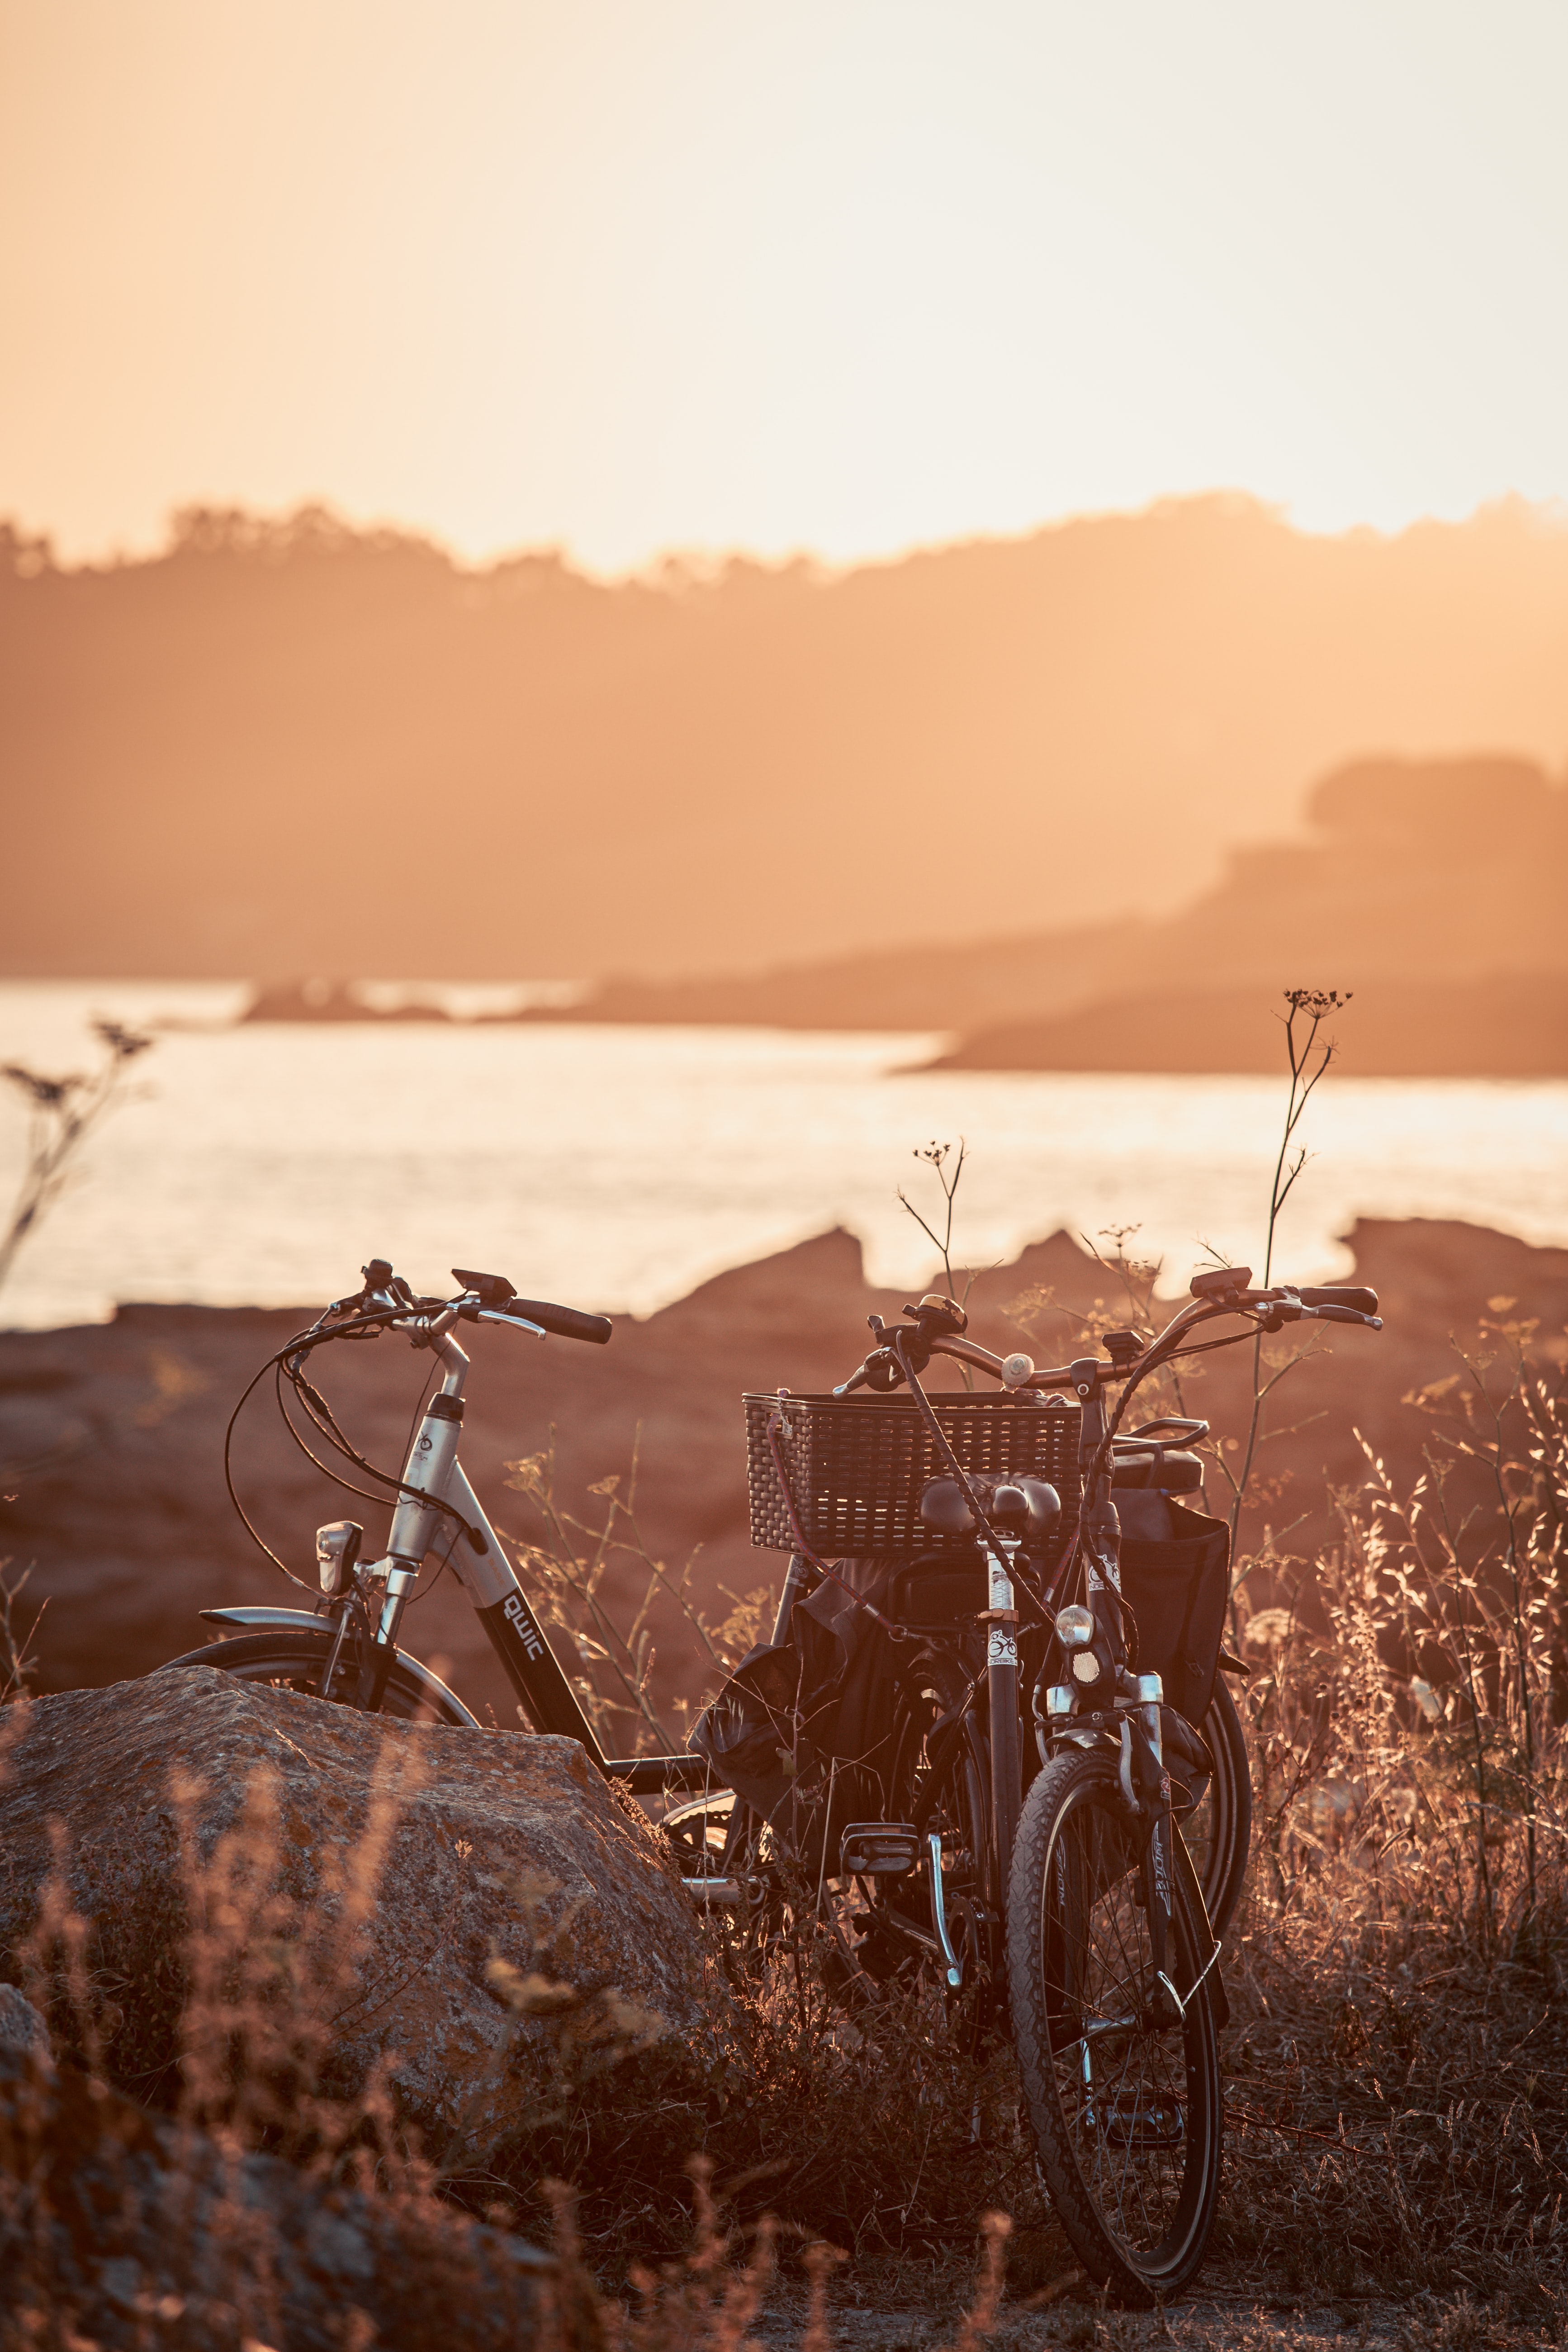 sunset, stroll, miscellaneous, bicycle Image for desktop